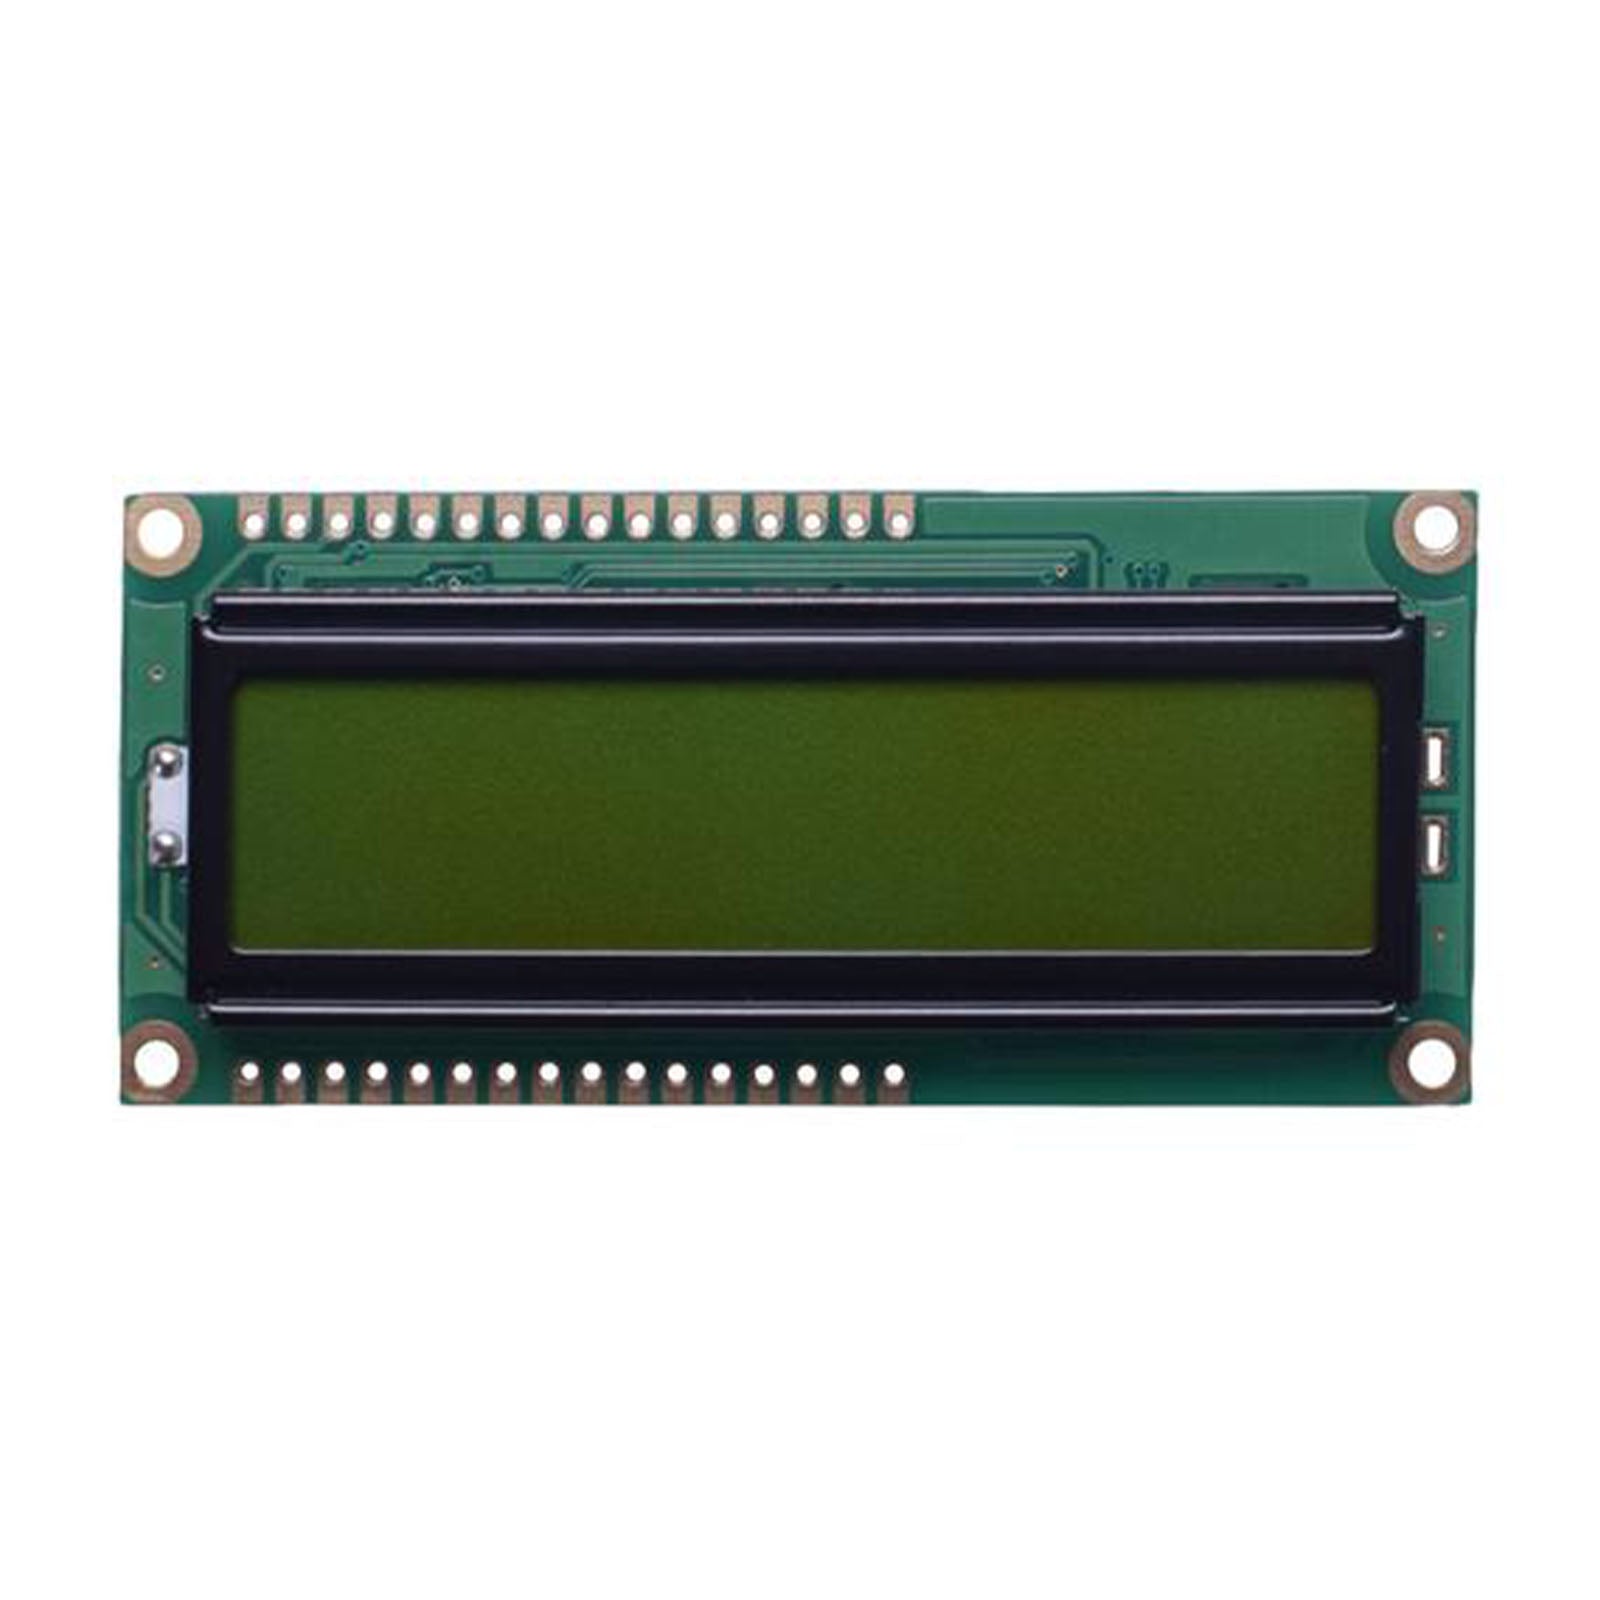 16x2 Green Character LCD with FSTN Transflective technology and MCU interface